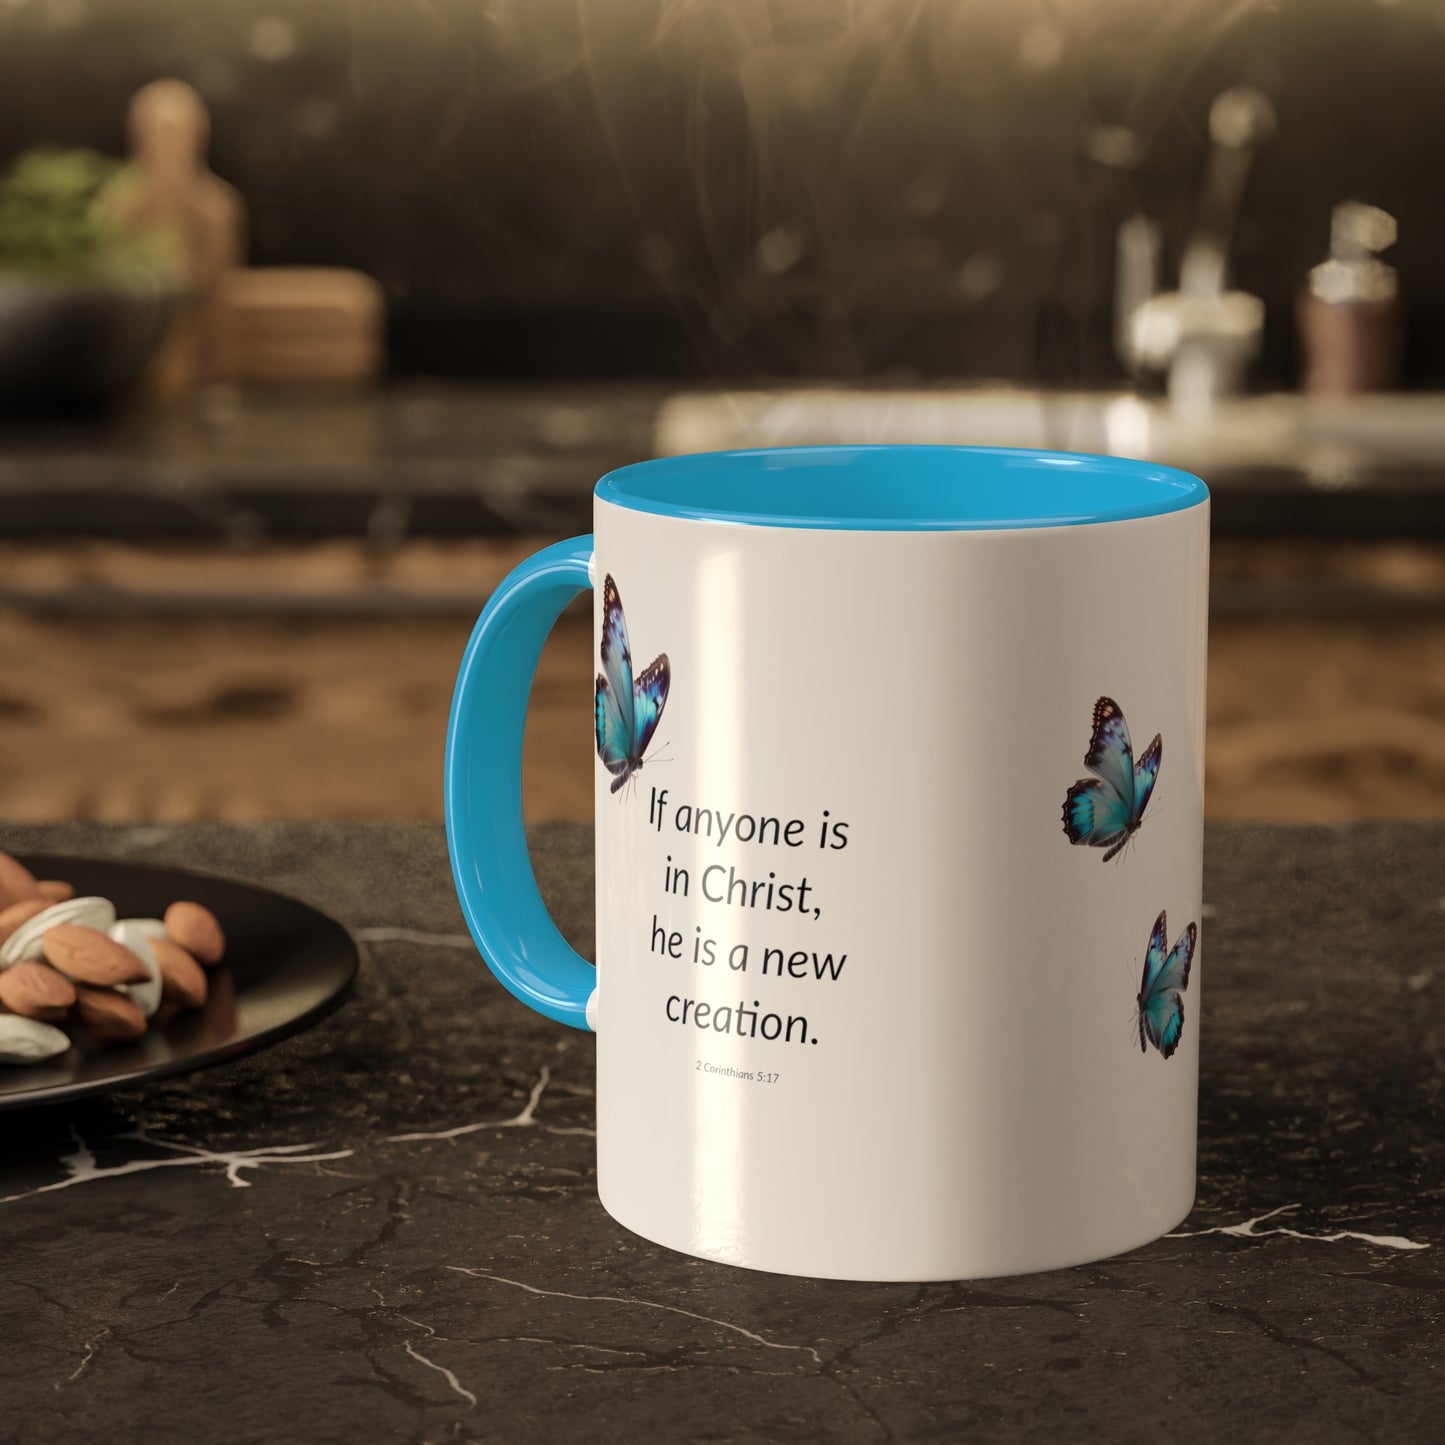 A New Creation - Blue Butterfly - Colorful Mugs, 11oz